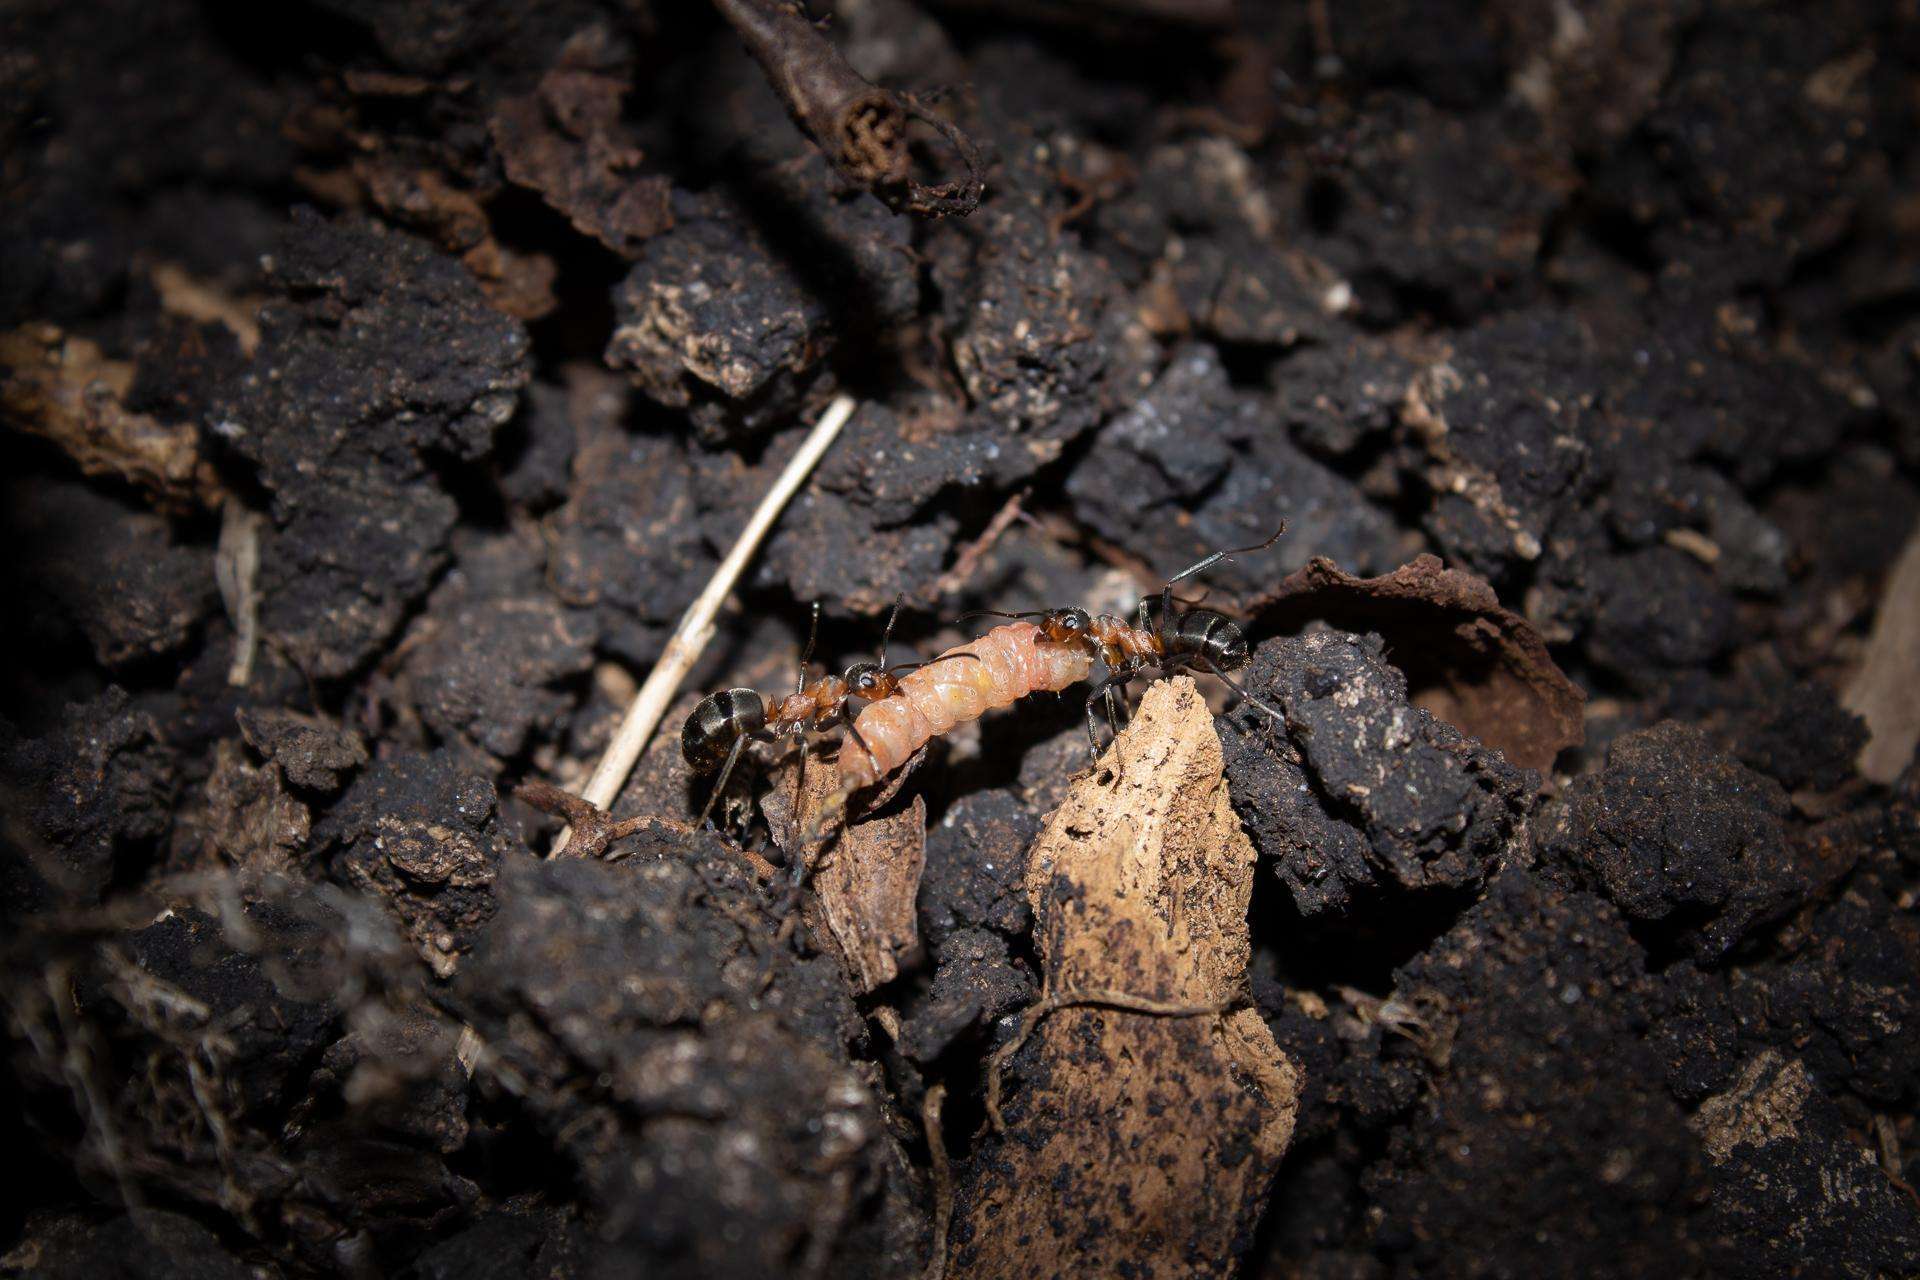 Two ants carrying a earth worm